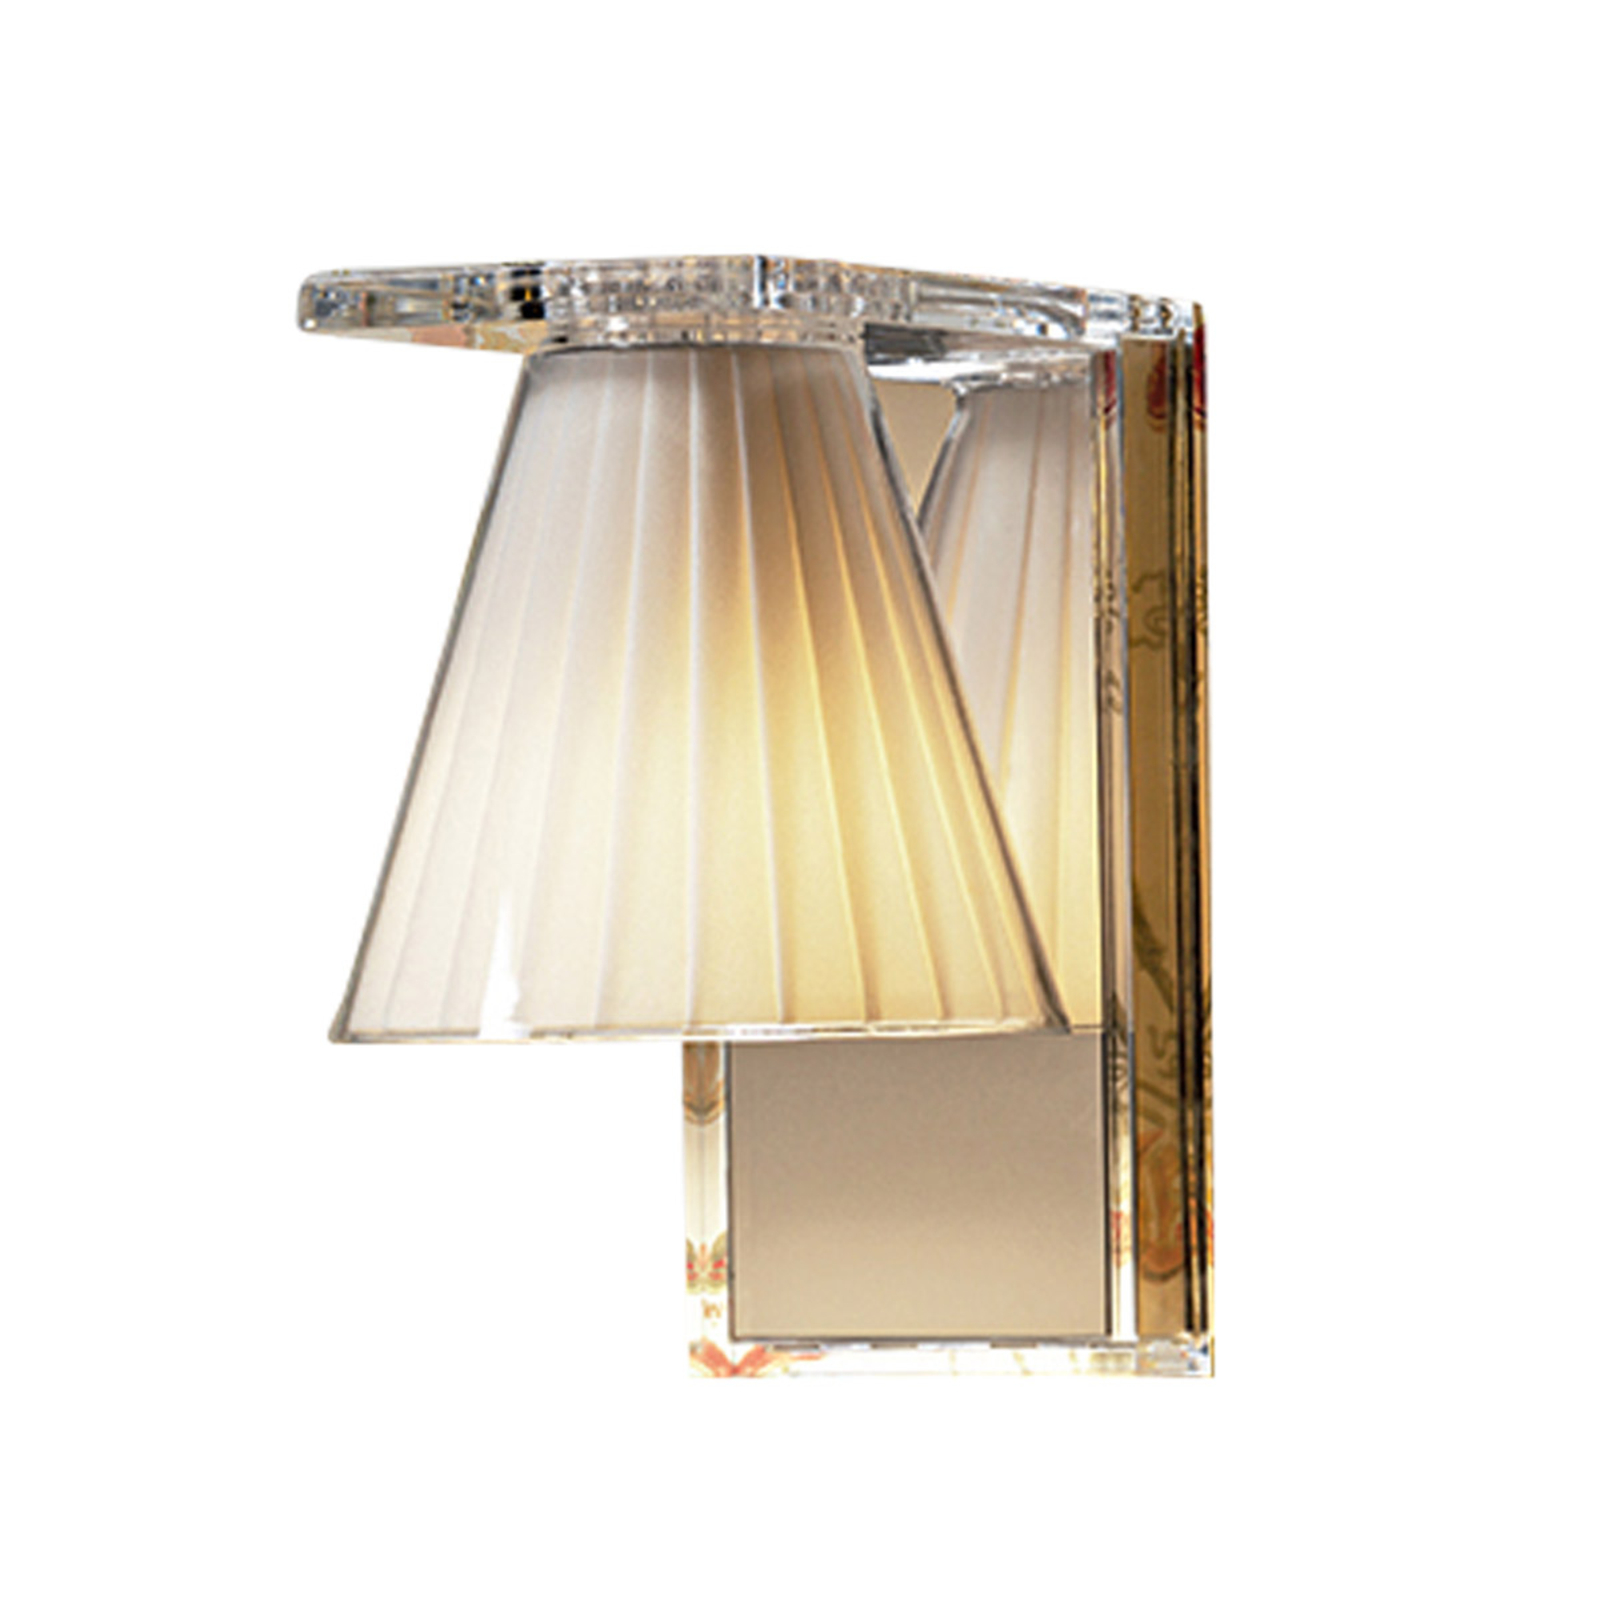 Kartell Light-Air wall light with textile shade